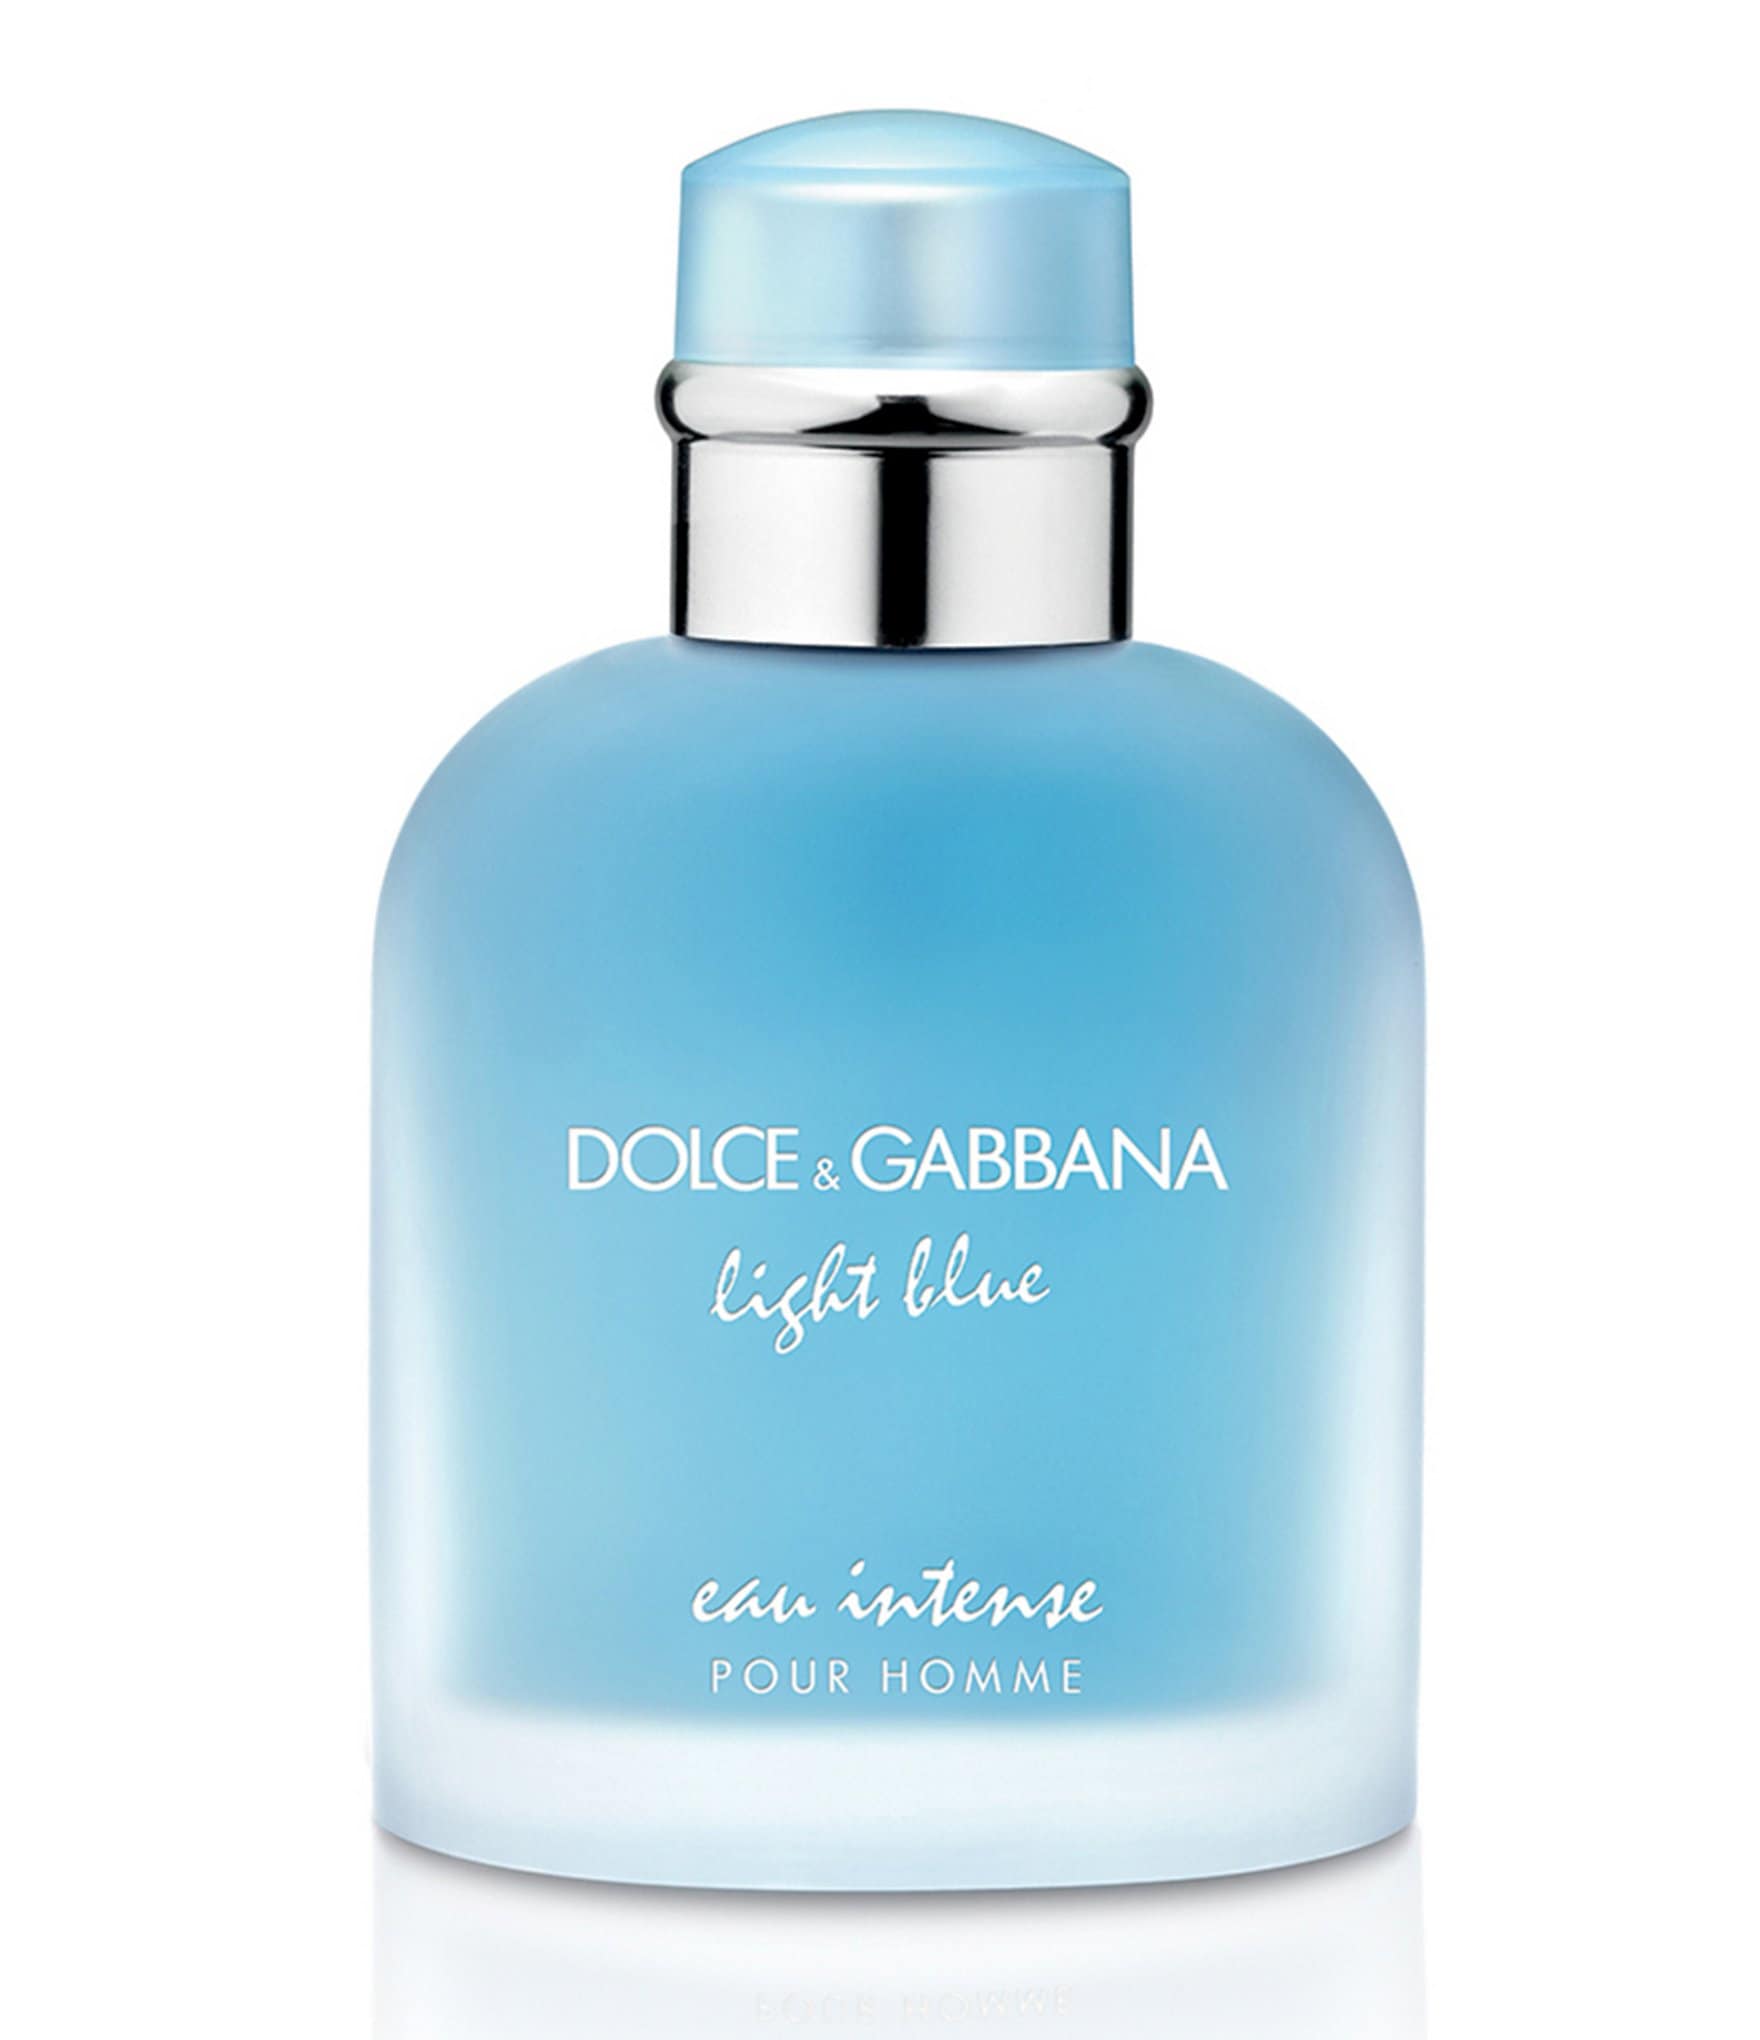 dolce and gabbana cologne light blue